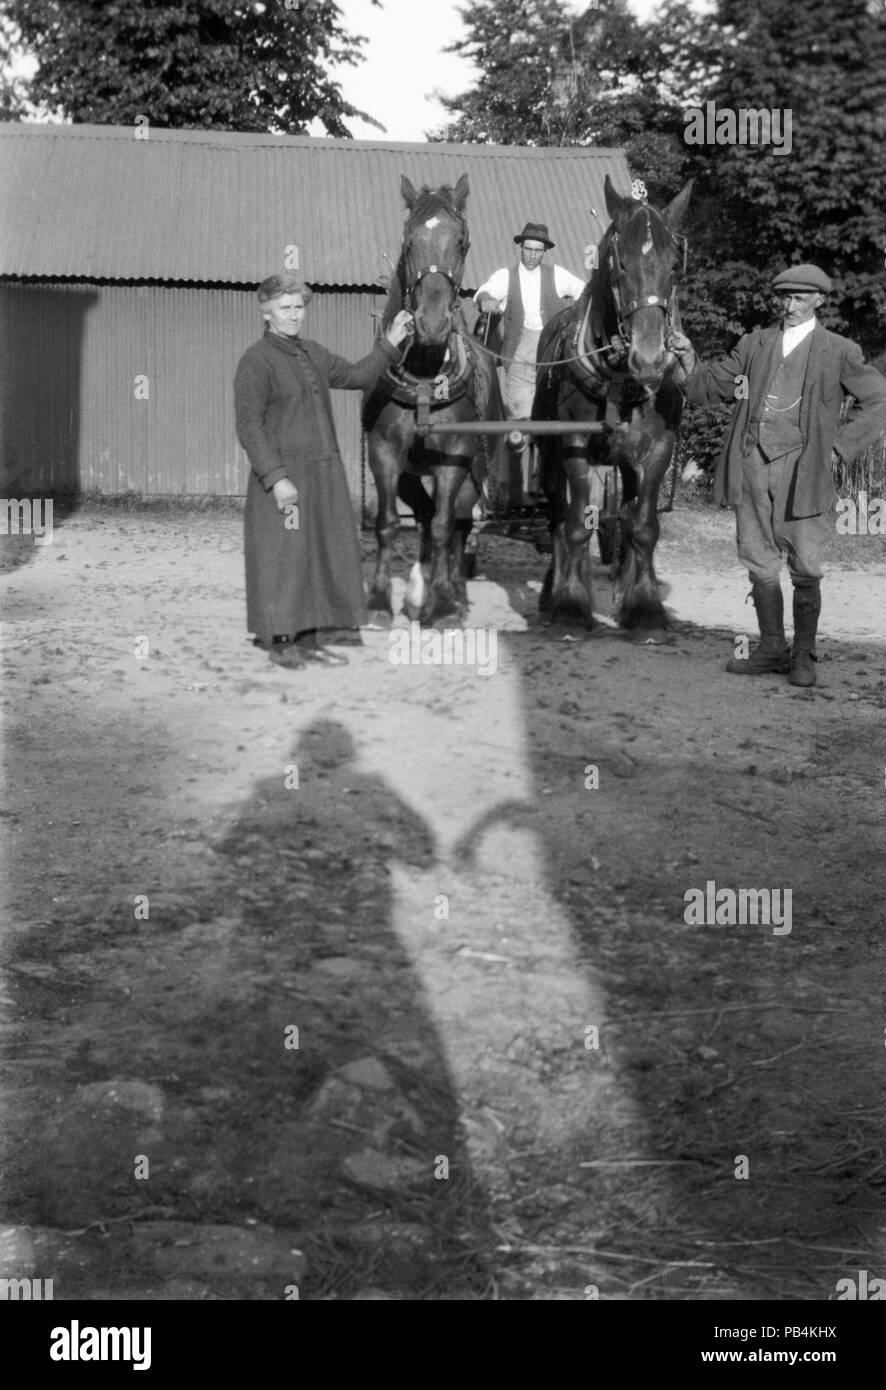 In a farmyard, with a metal barn in the background, a farmer, farmers wife and farm hand pose with two working horses.The Shadow of the photographer can be seen in the foreground. Image taken circa 1920 Stock Photo